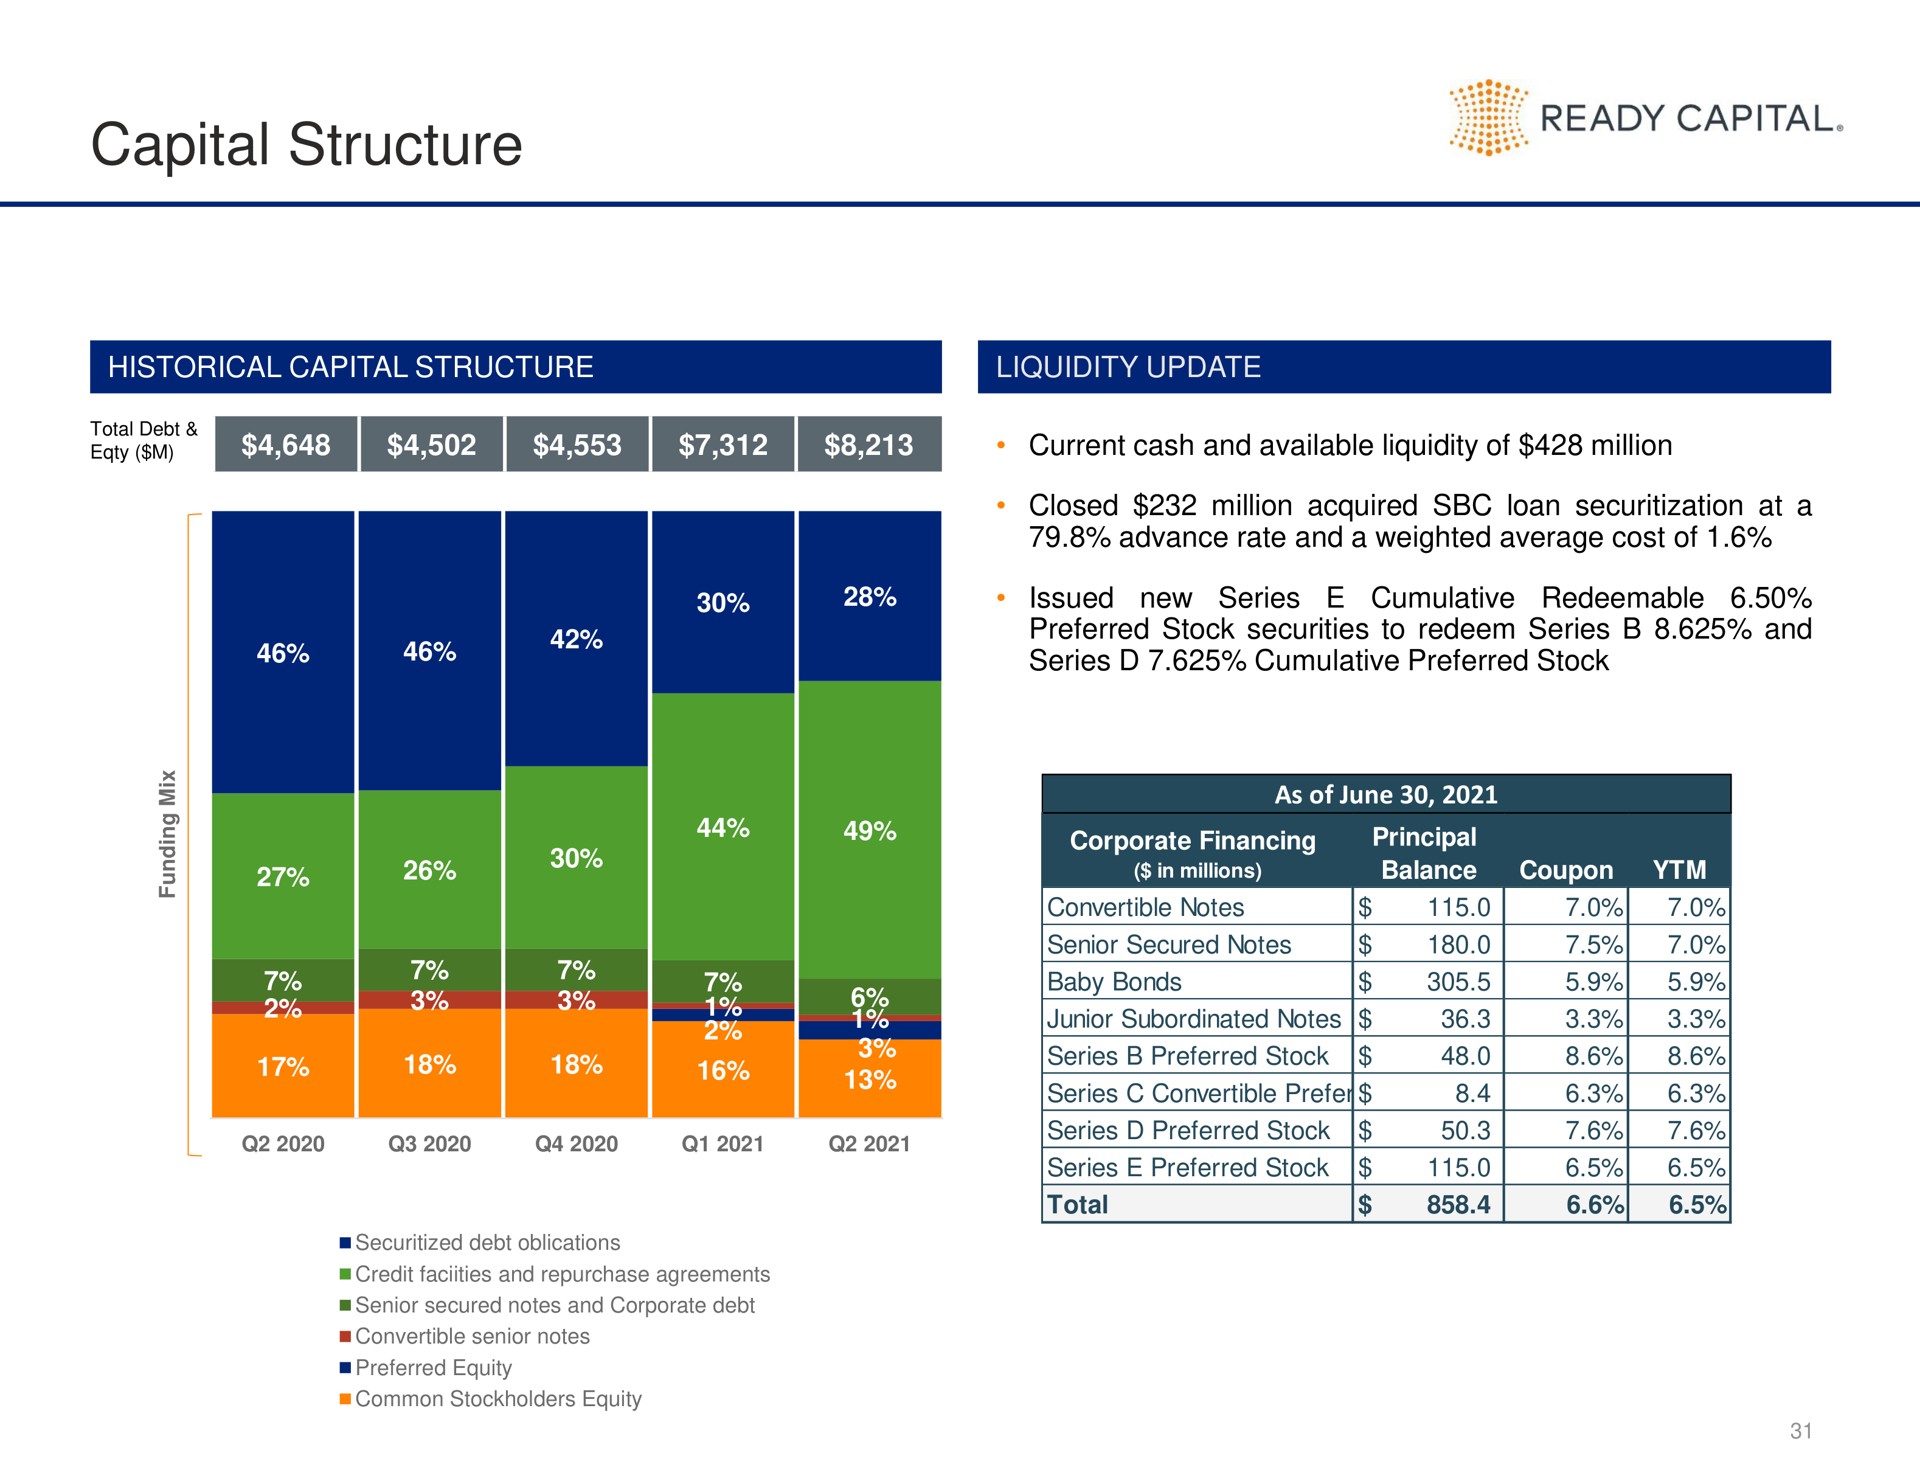 capital structure | Ready Capital